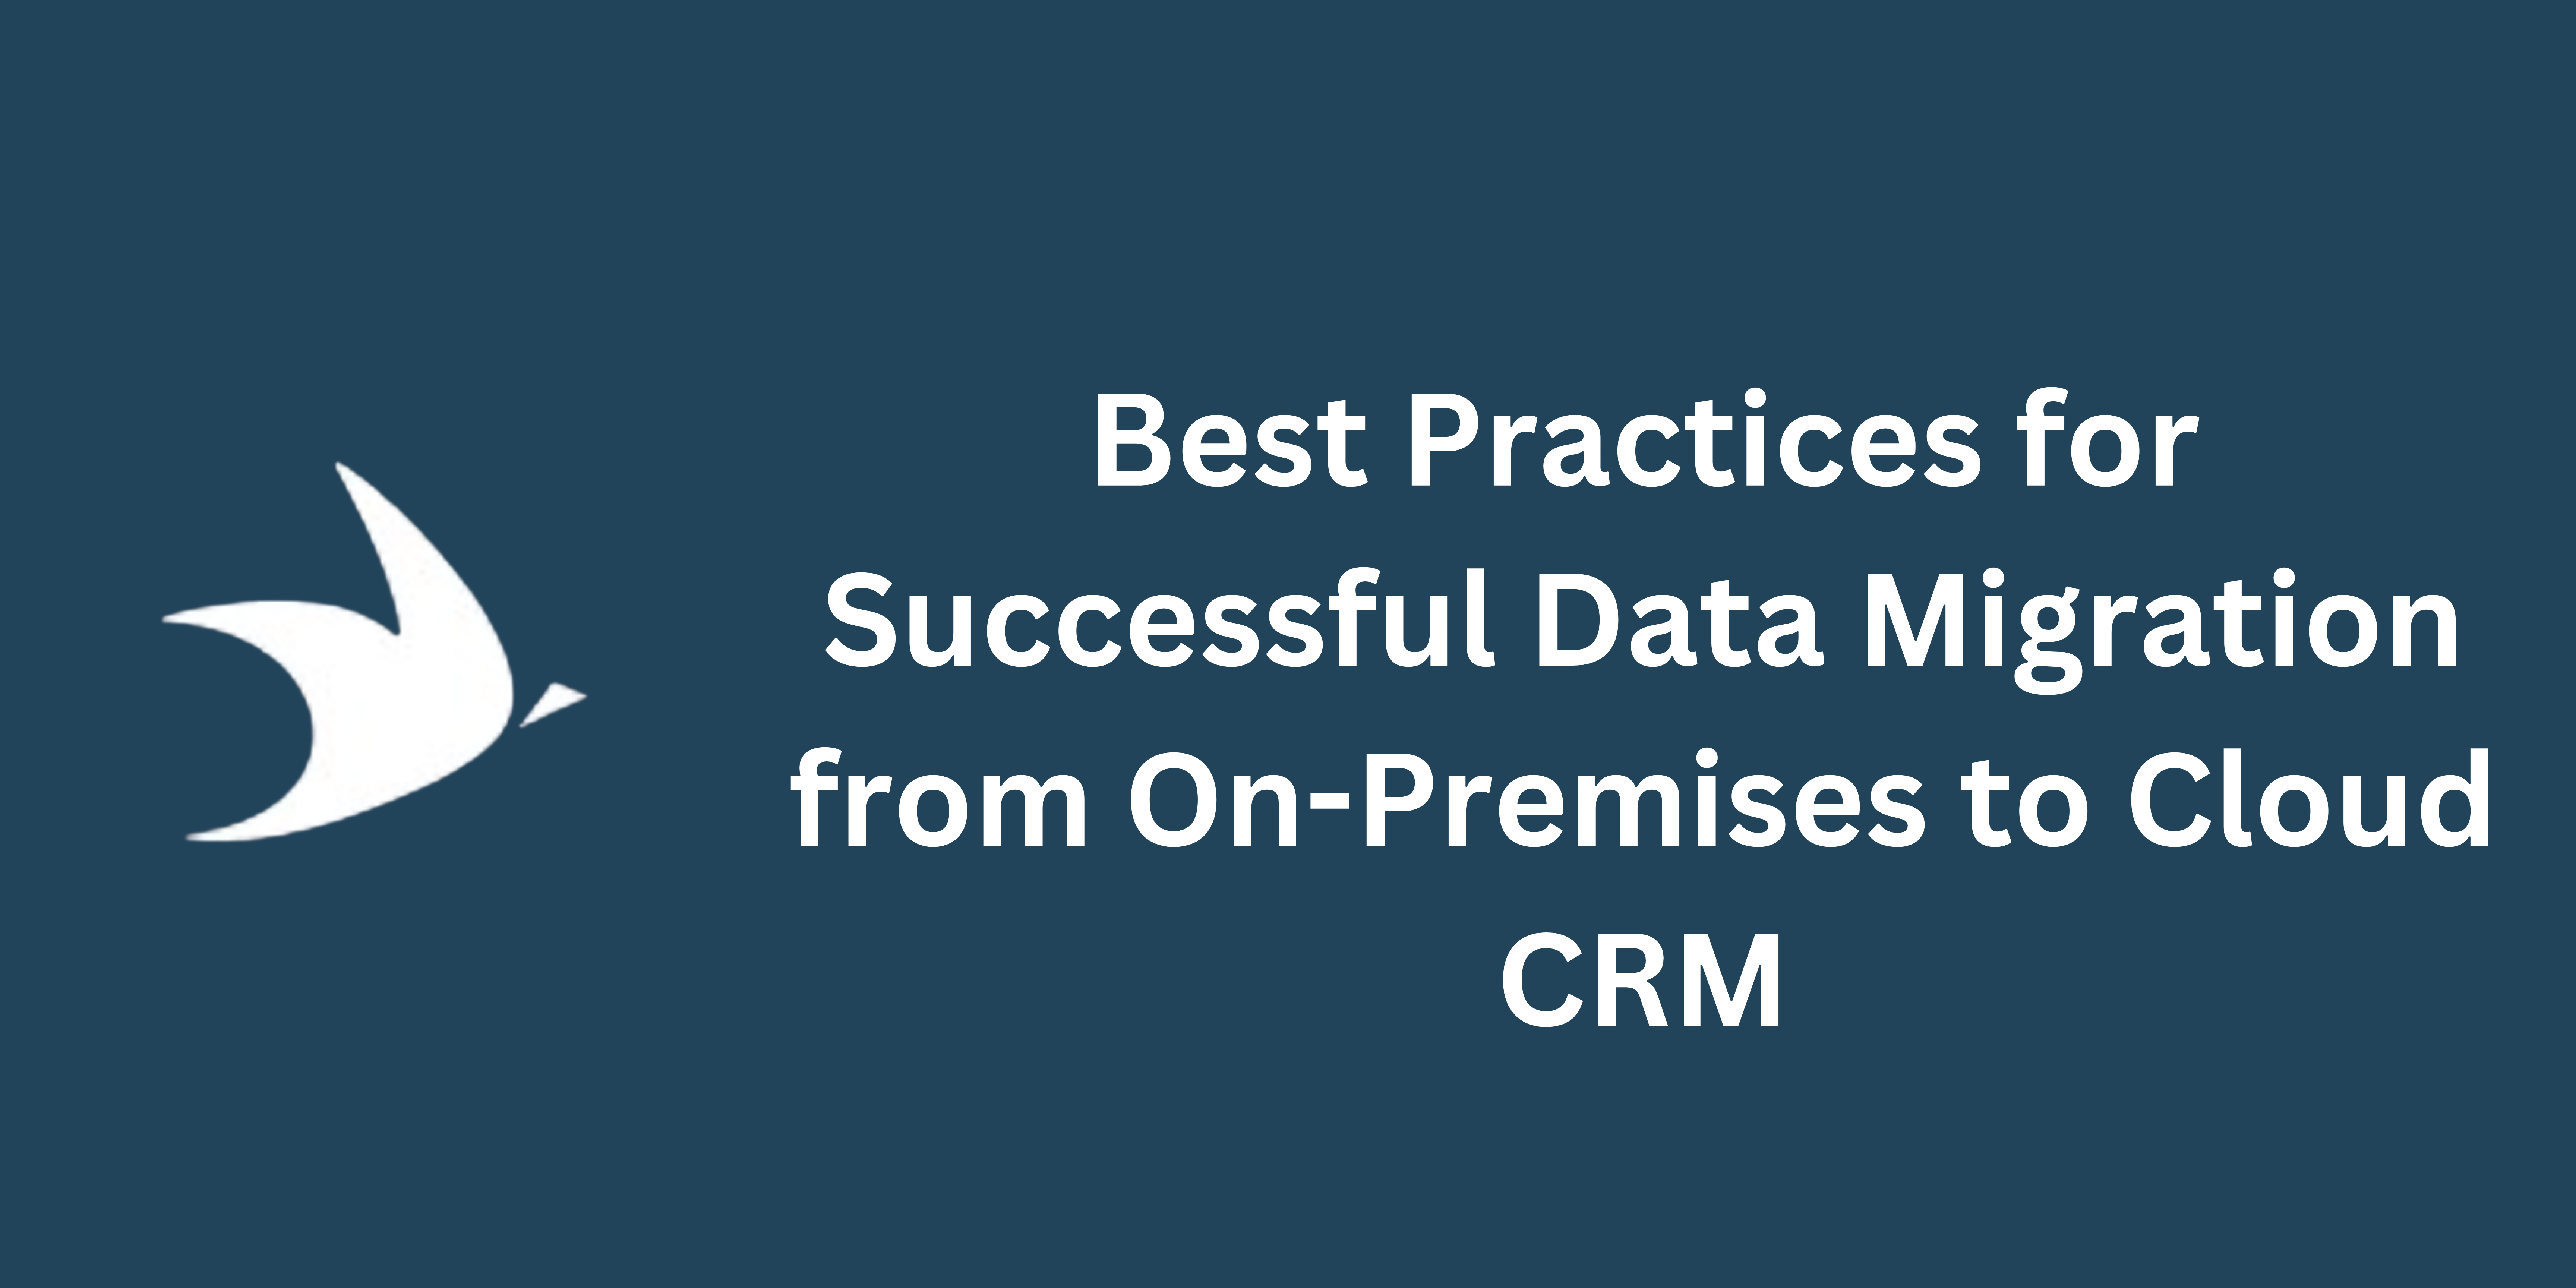 Best Practices for Successful Data Migration from On-Premises to Cloud CRM